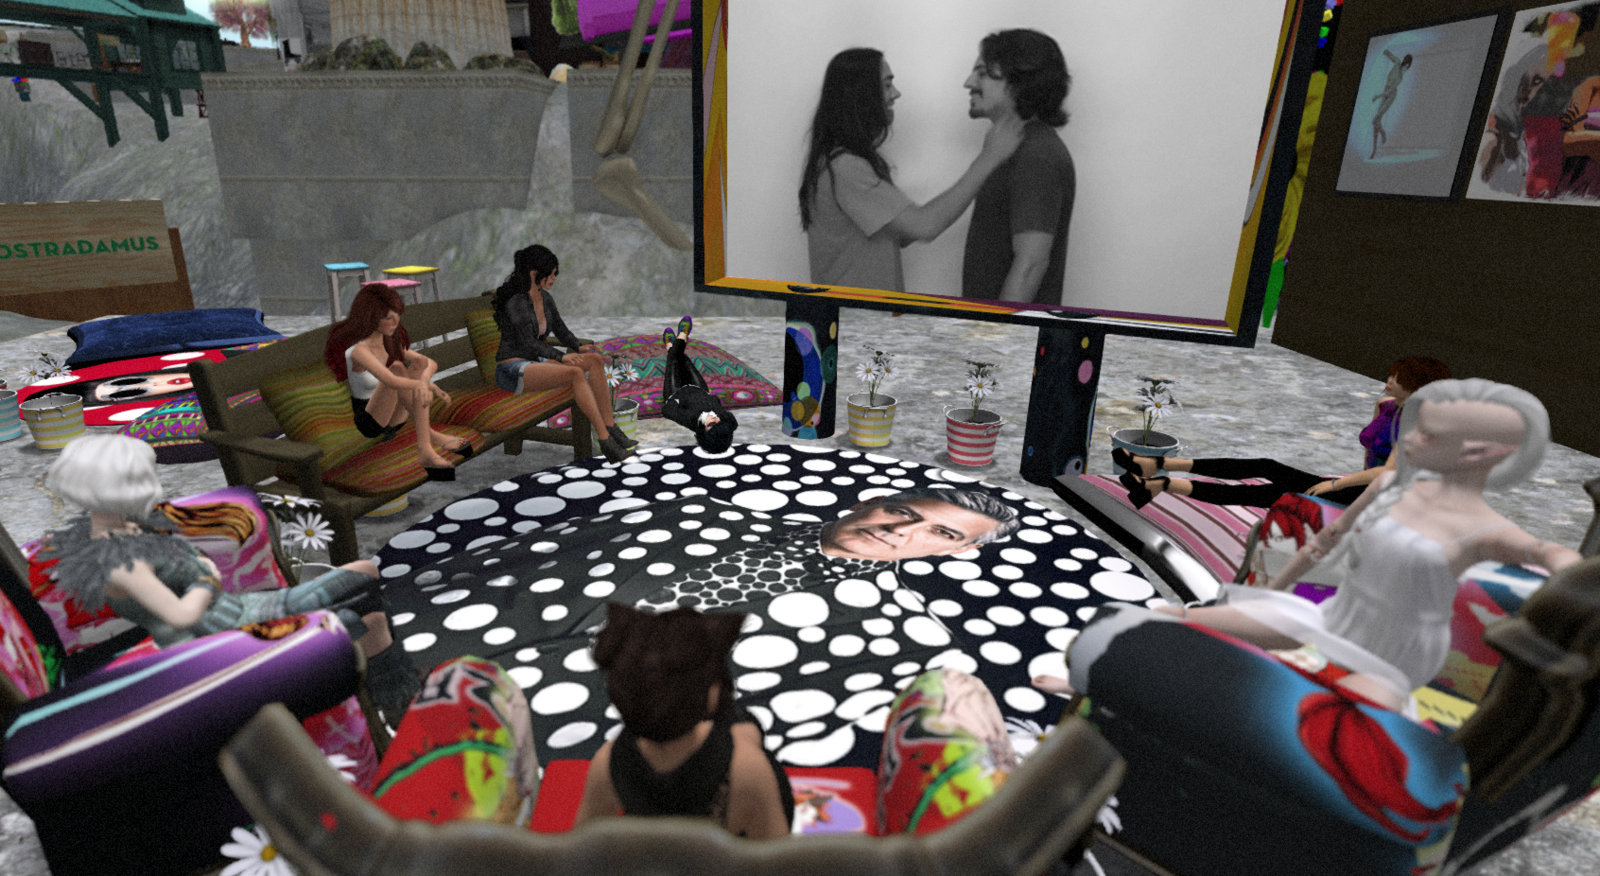 Avatars gathered around a large flat-screen TV and watching art videos from Micol Hebron